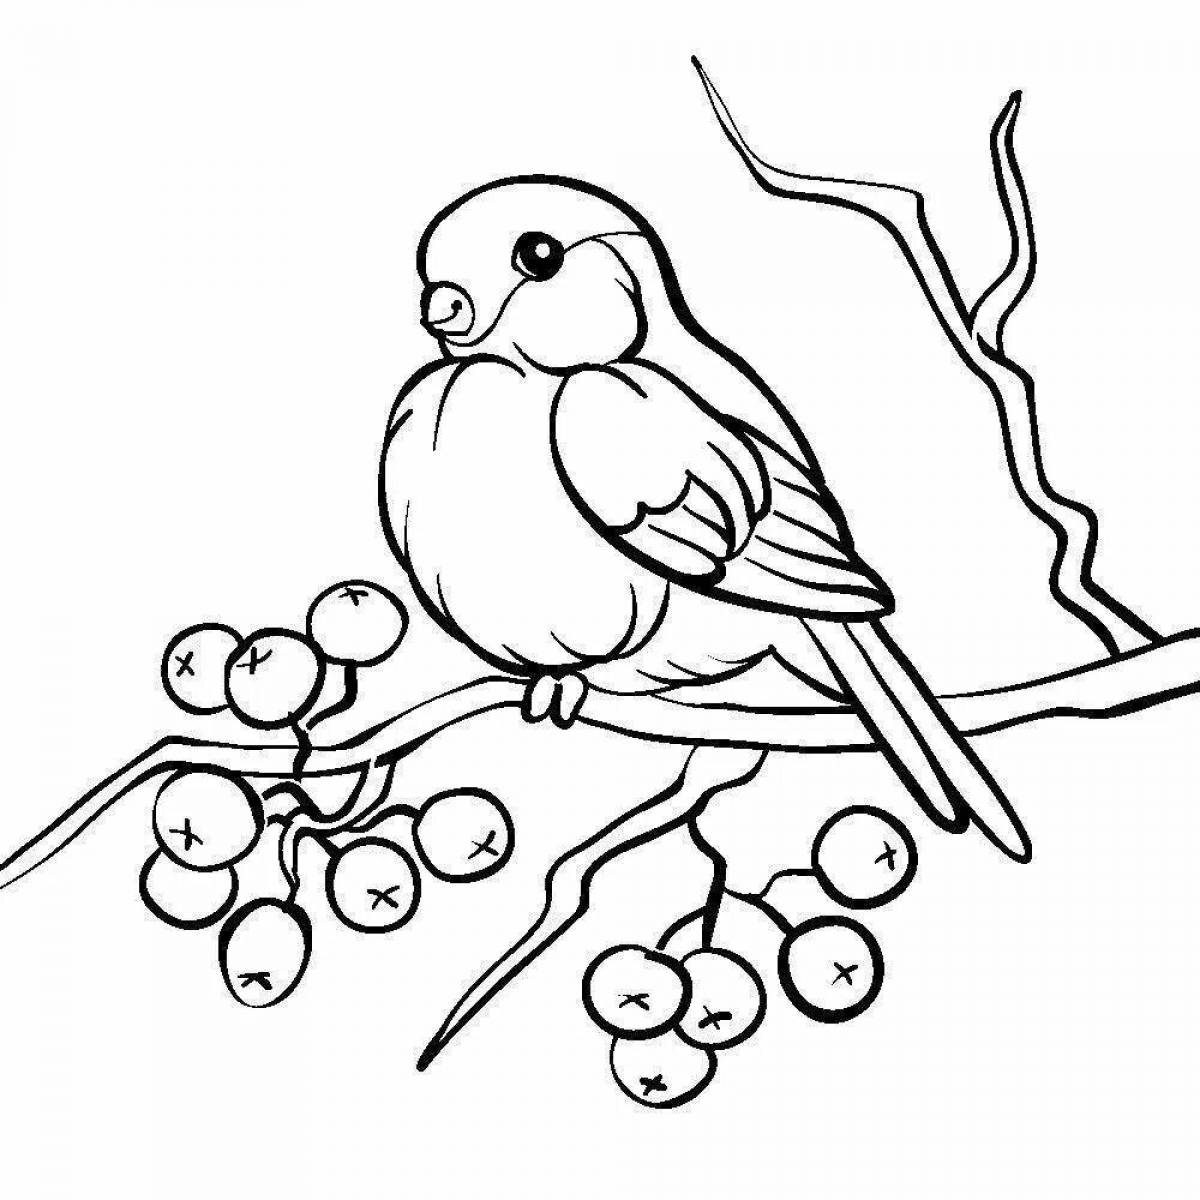 Great bullfinch coloring book for kids 6-7 years old